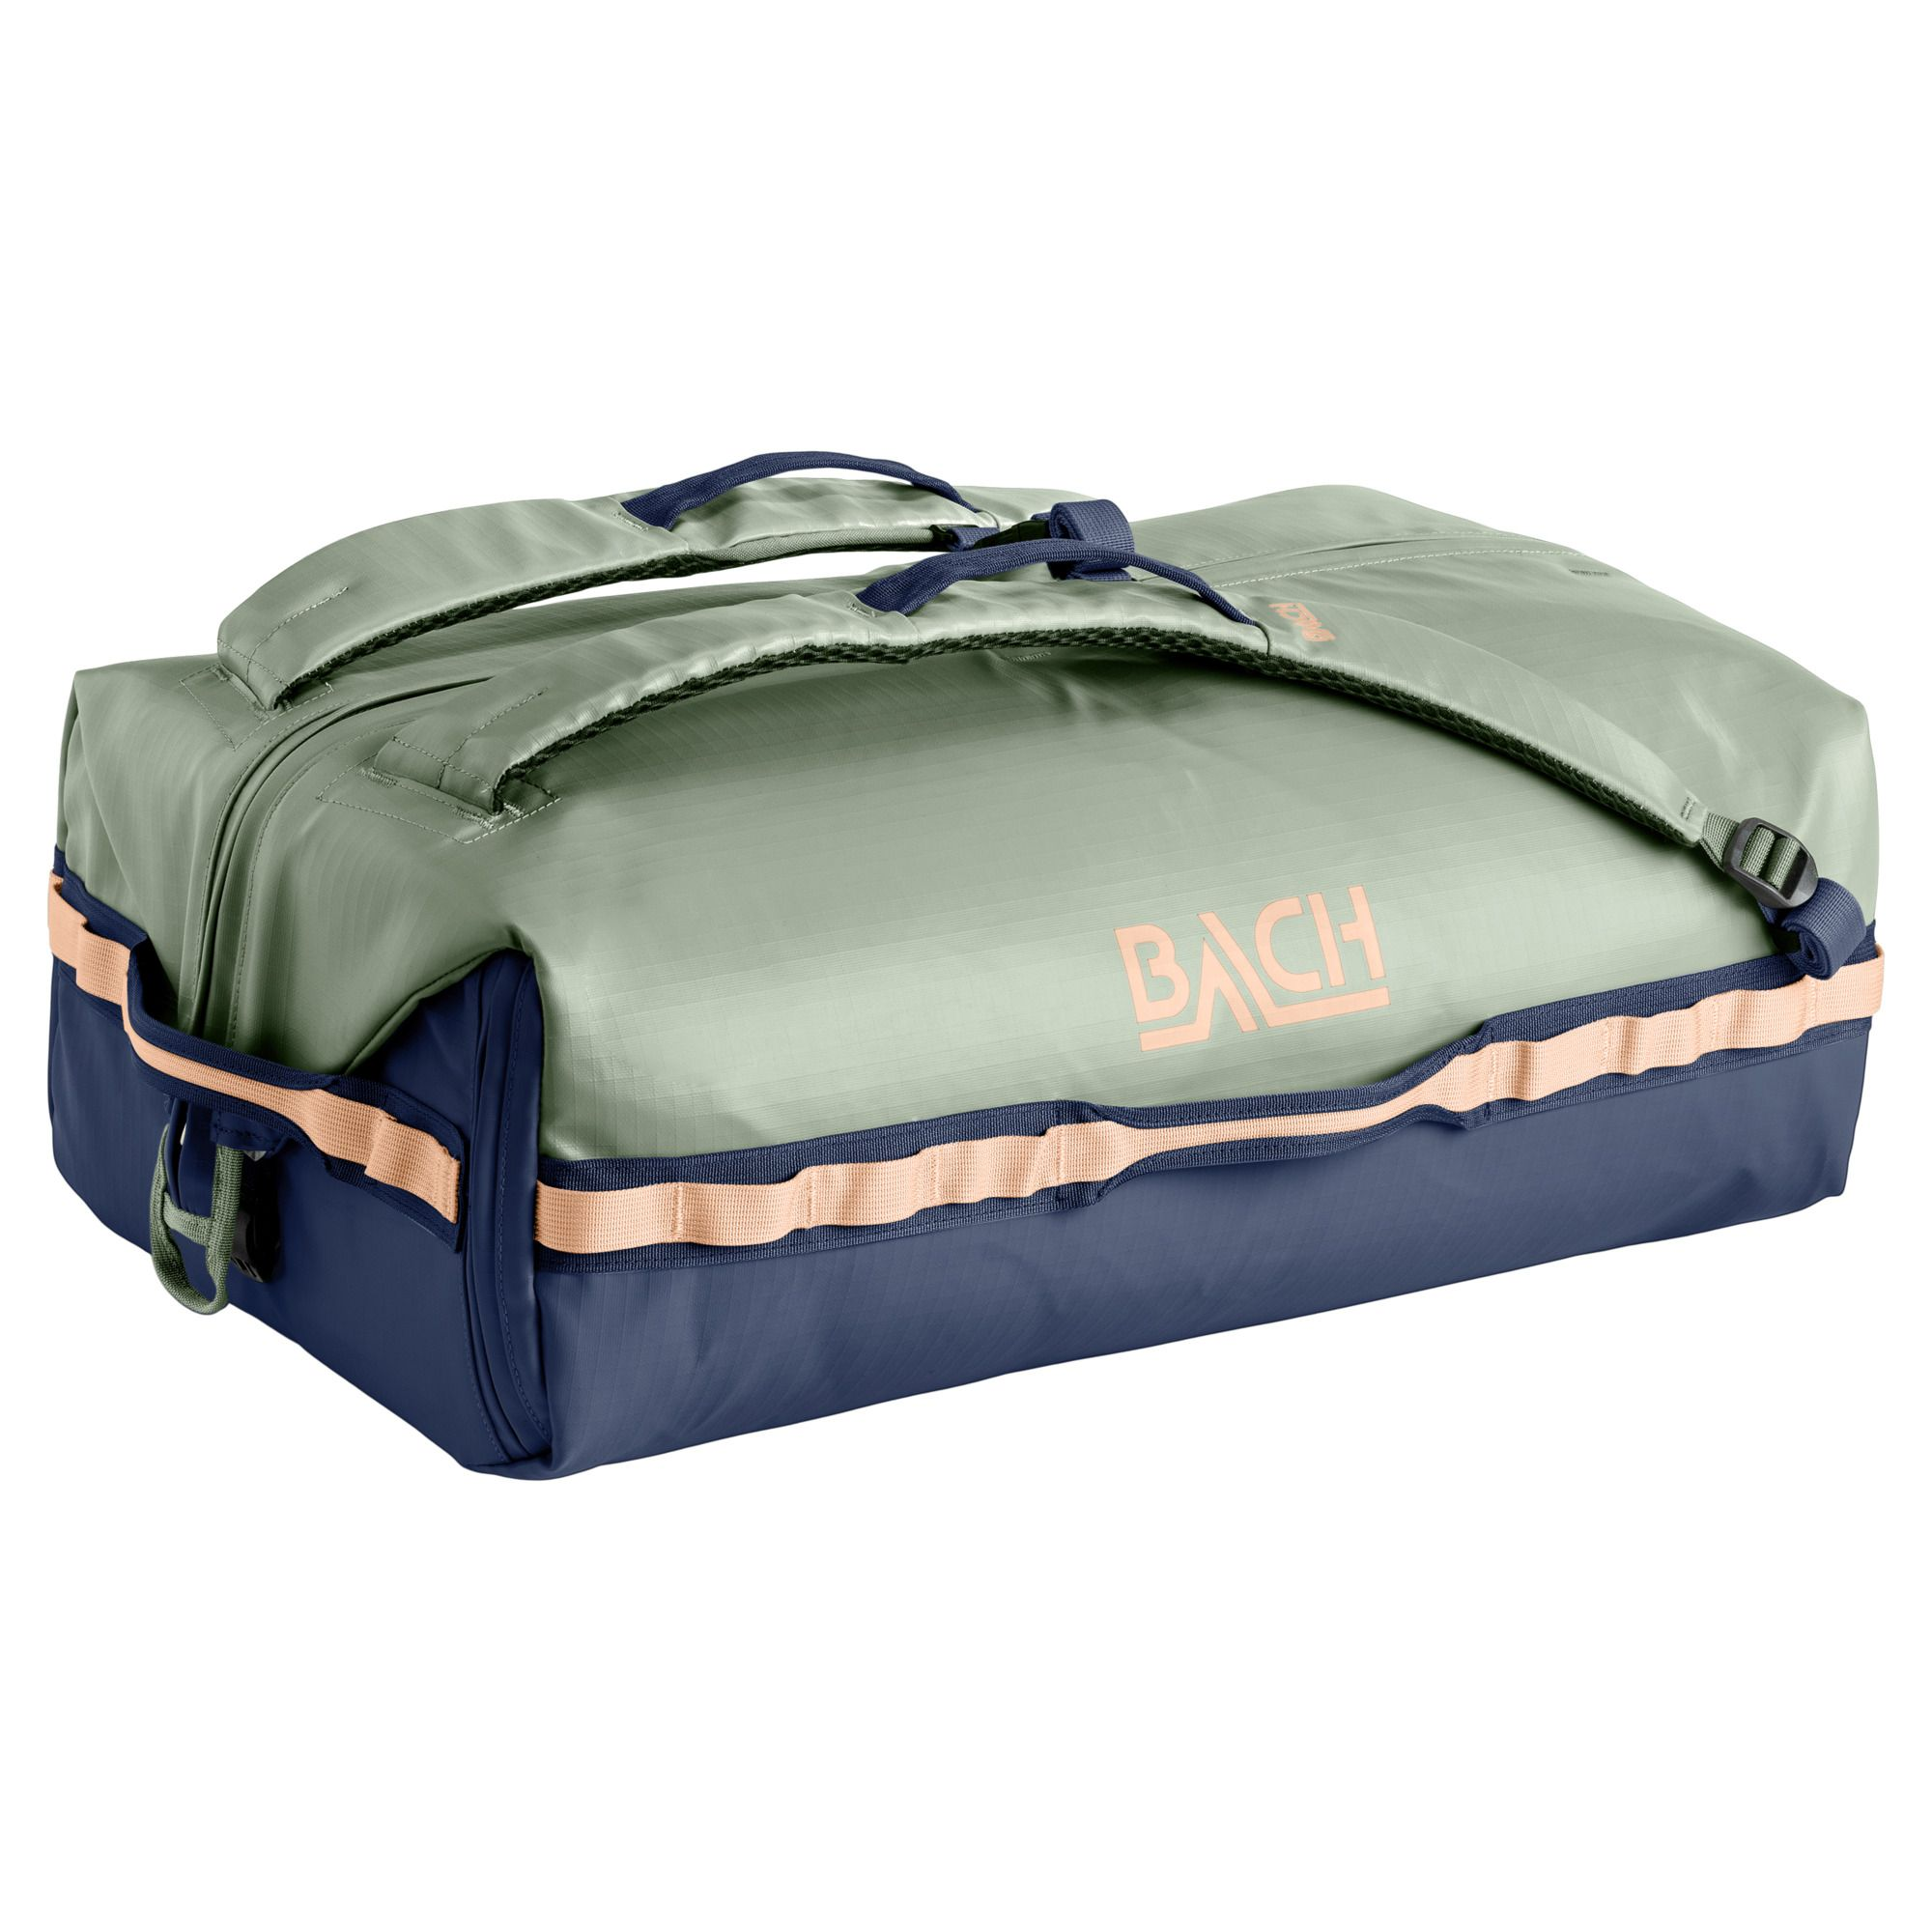 Bach Duffle Dr. Expedition 40 Reisetasche